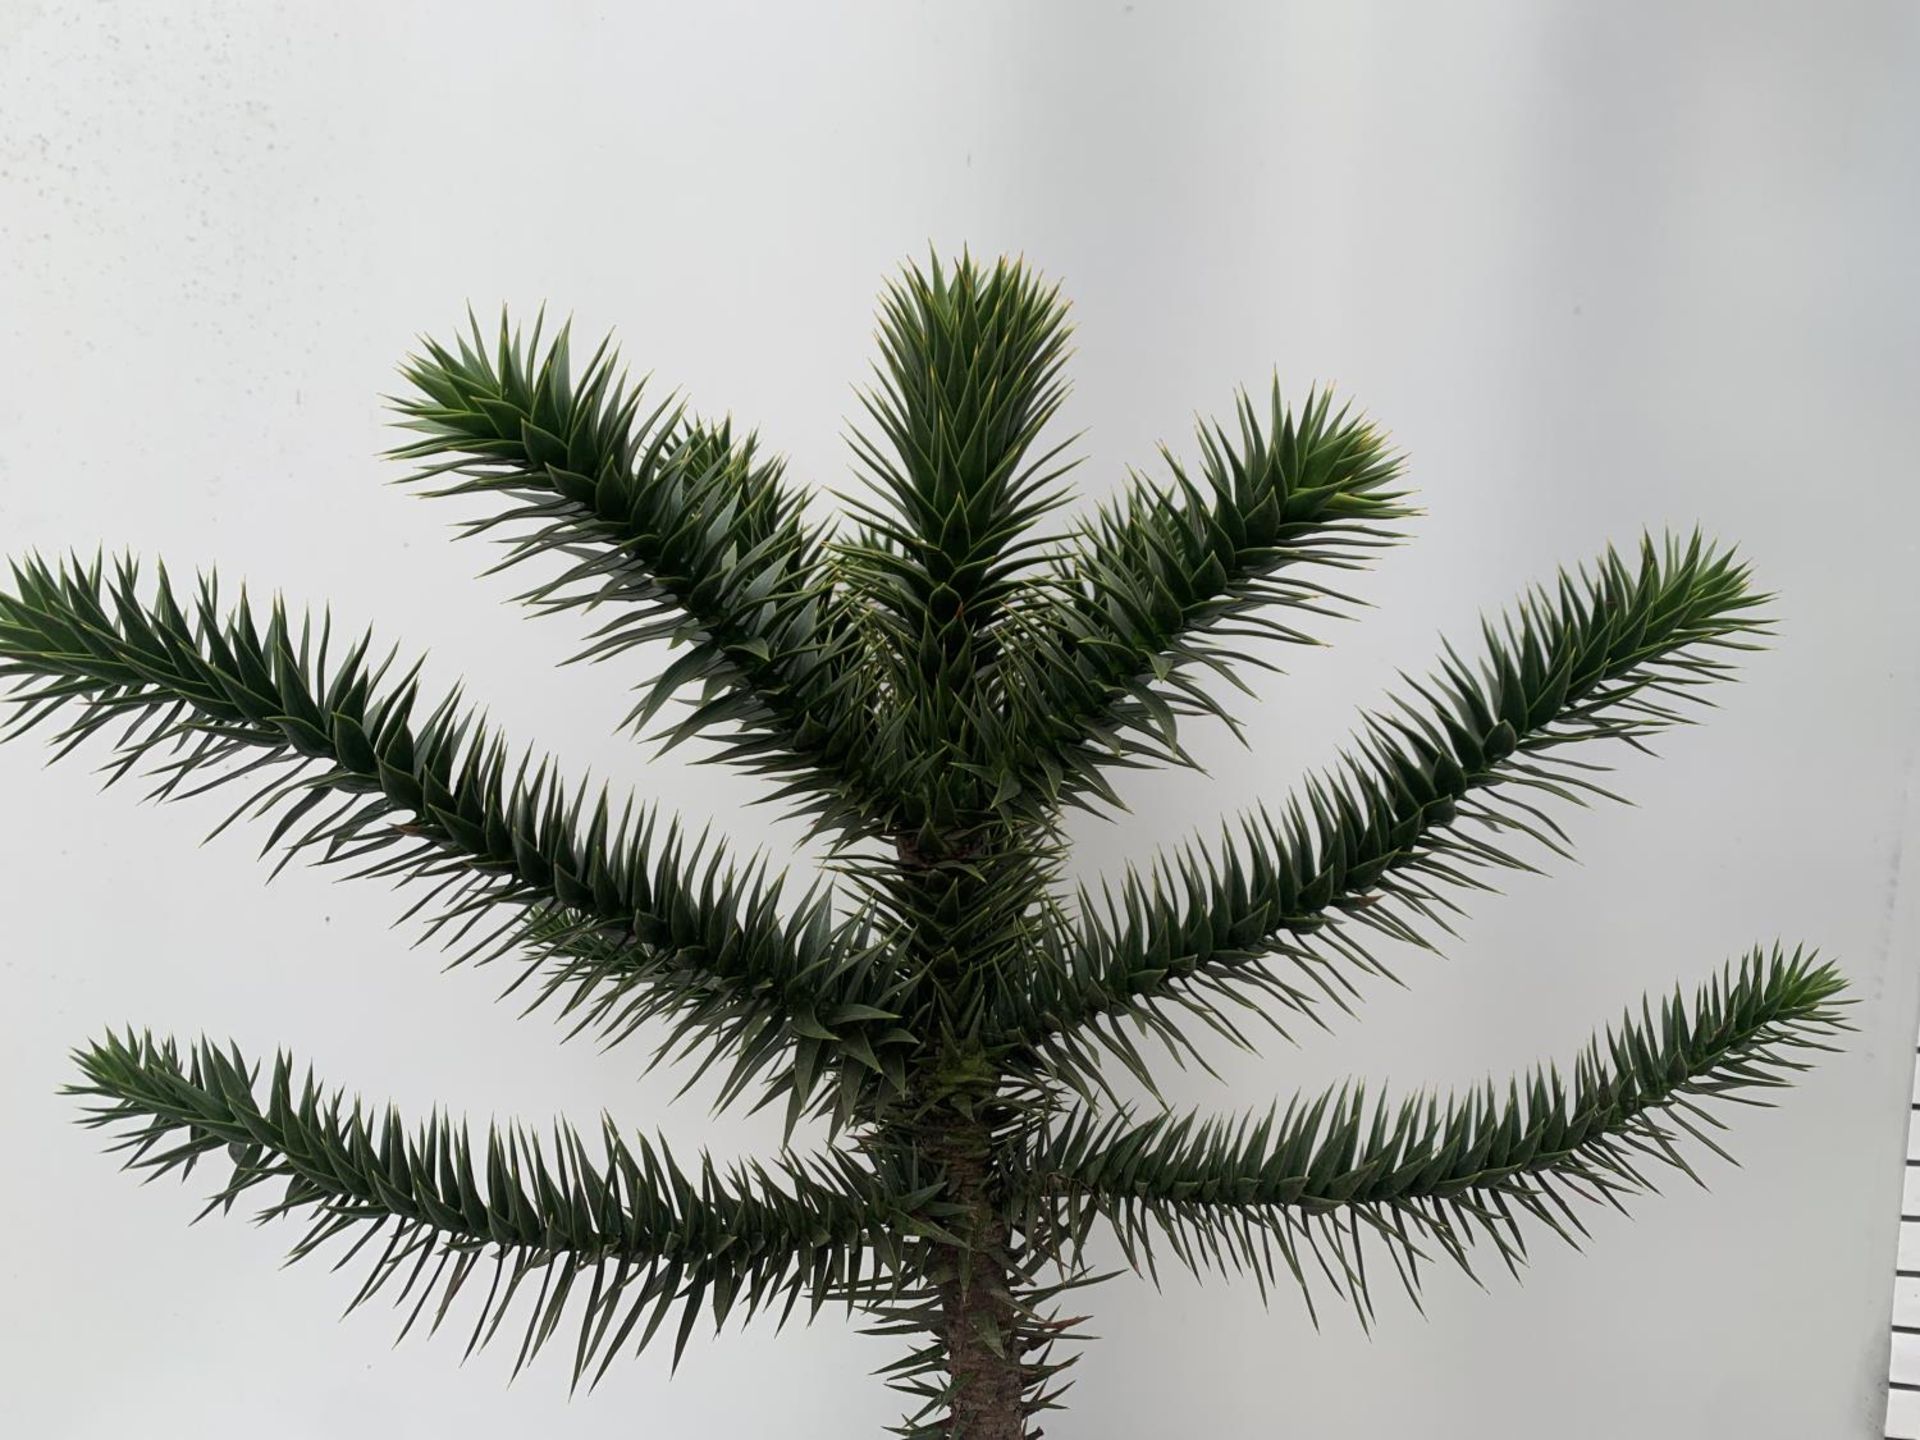 ONE MONKEY PUZZLE TREE ARAUCARIA ARAUCANA APPROX 70CM IN HEIGHT IN A 5 LTR POT PLUS VAT - Image 2 of 5